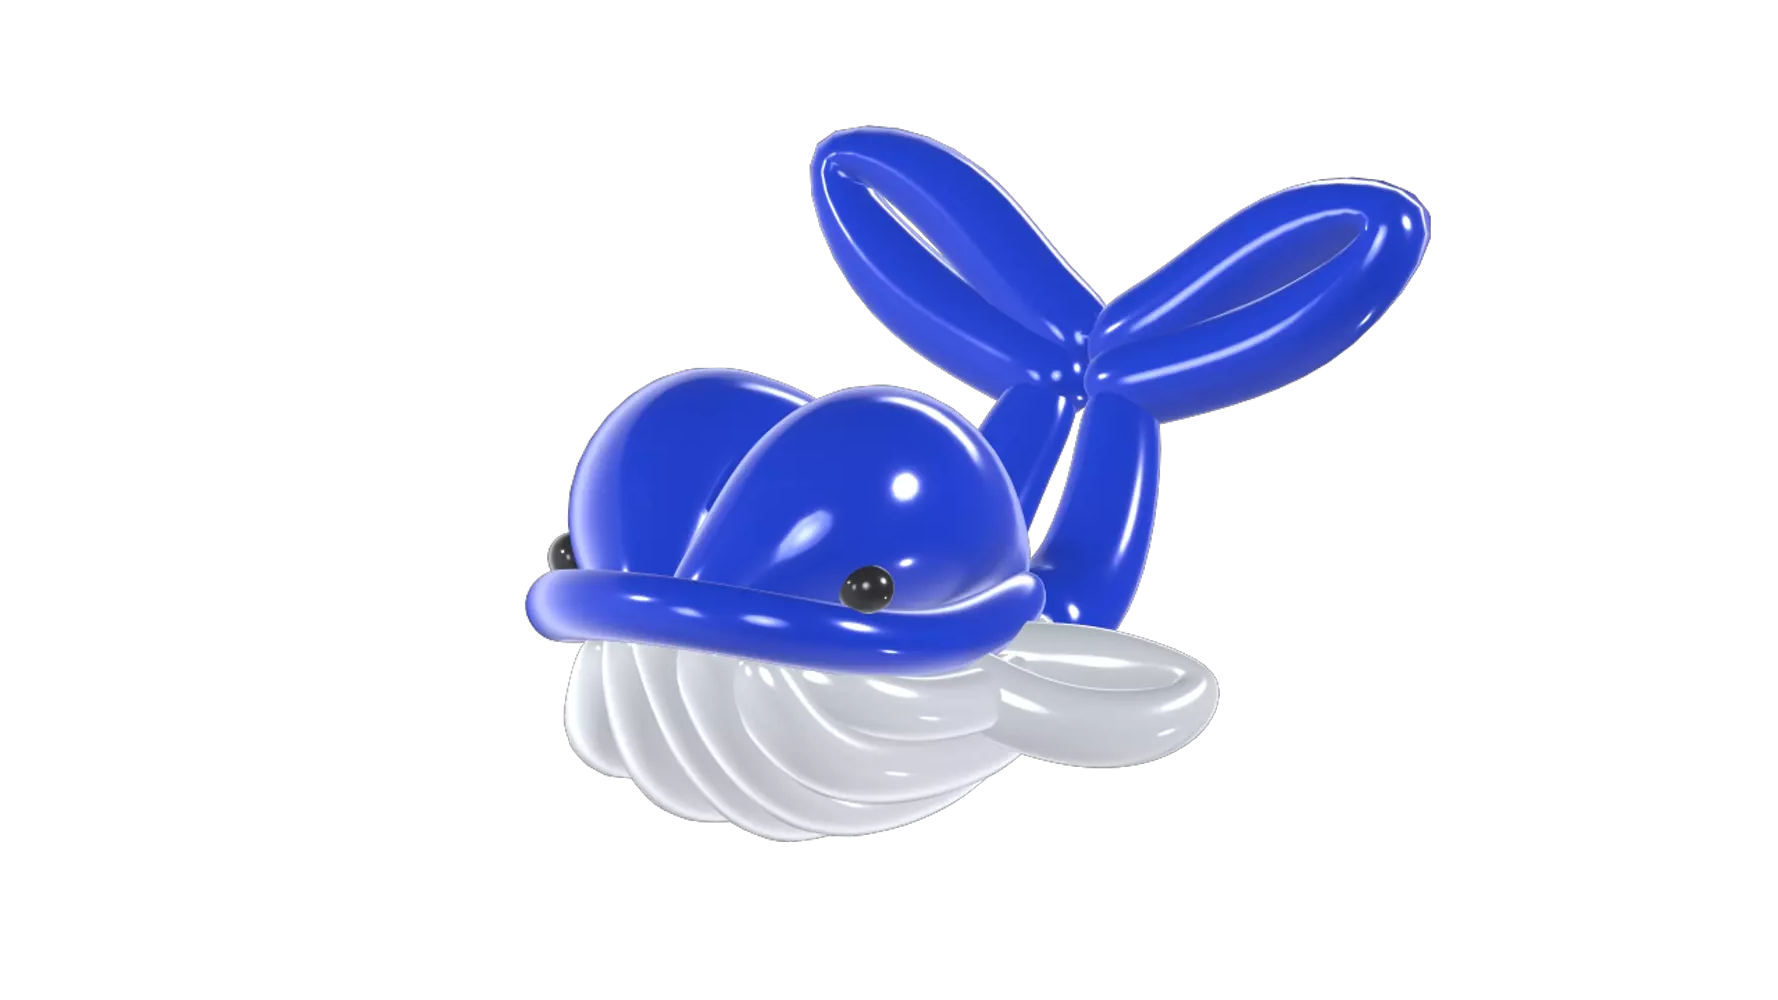 Whale Balloon 3D Graphic